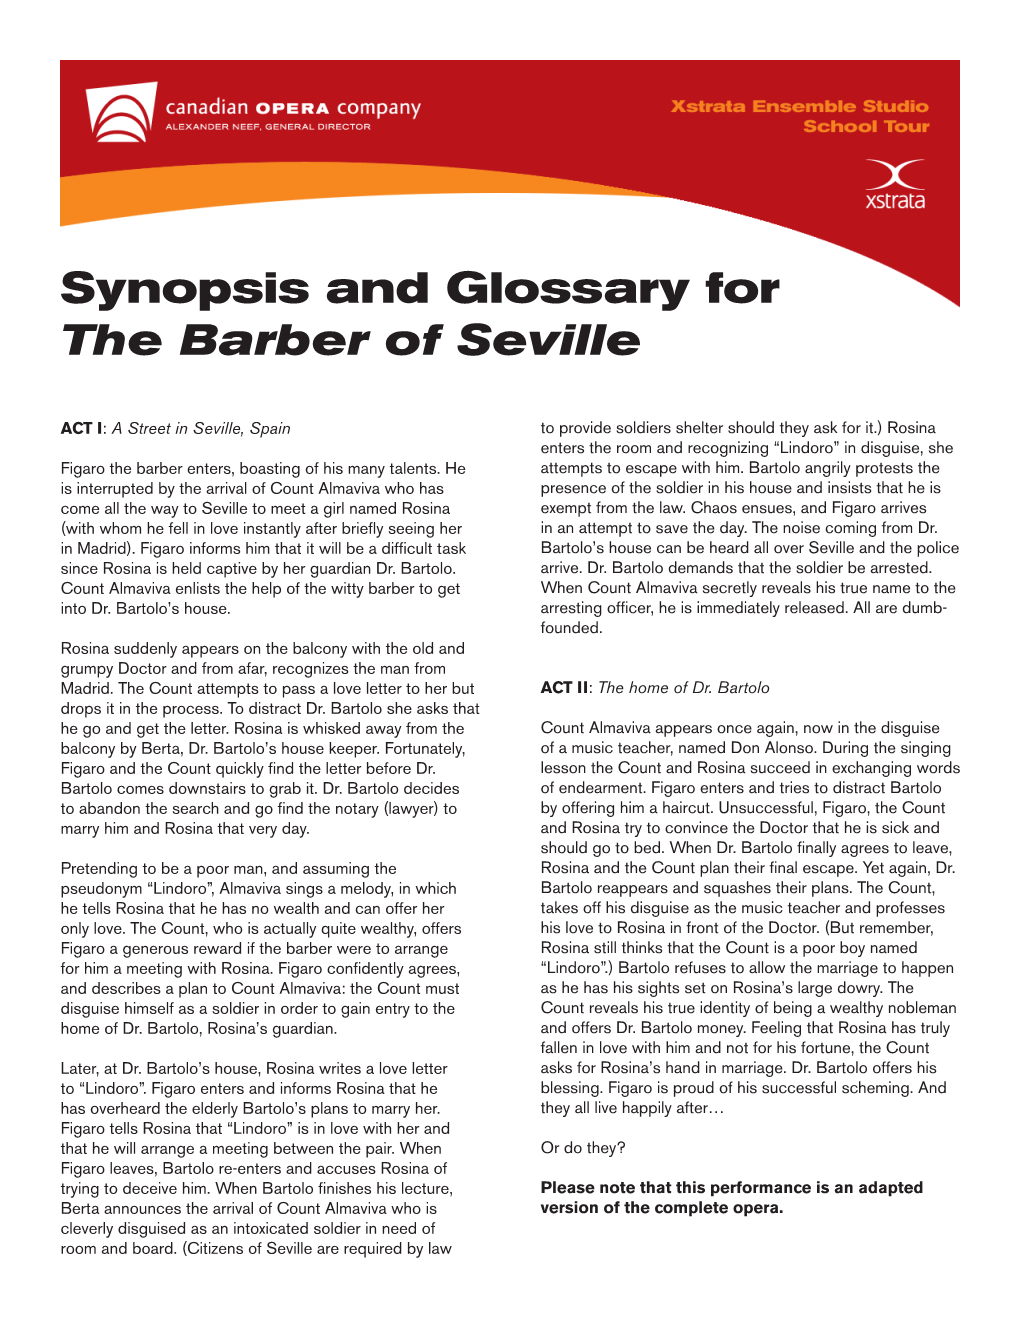 Synopsis and Glossary for the Barber of Seville